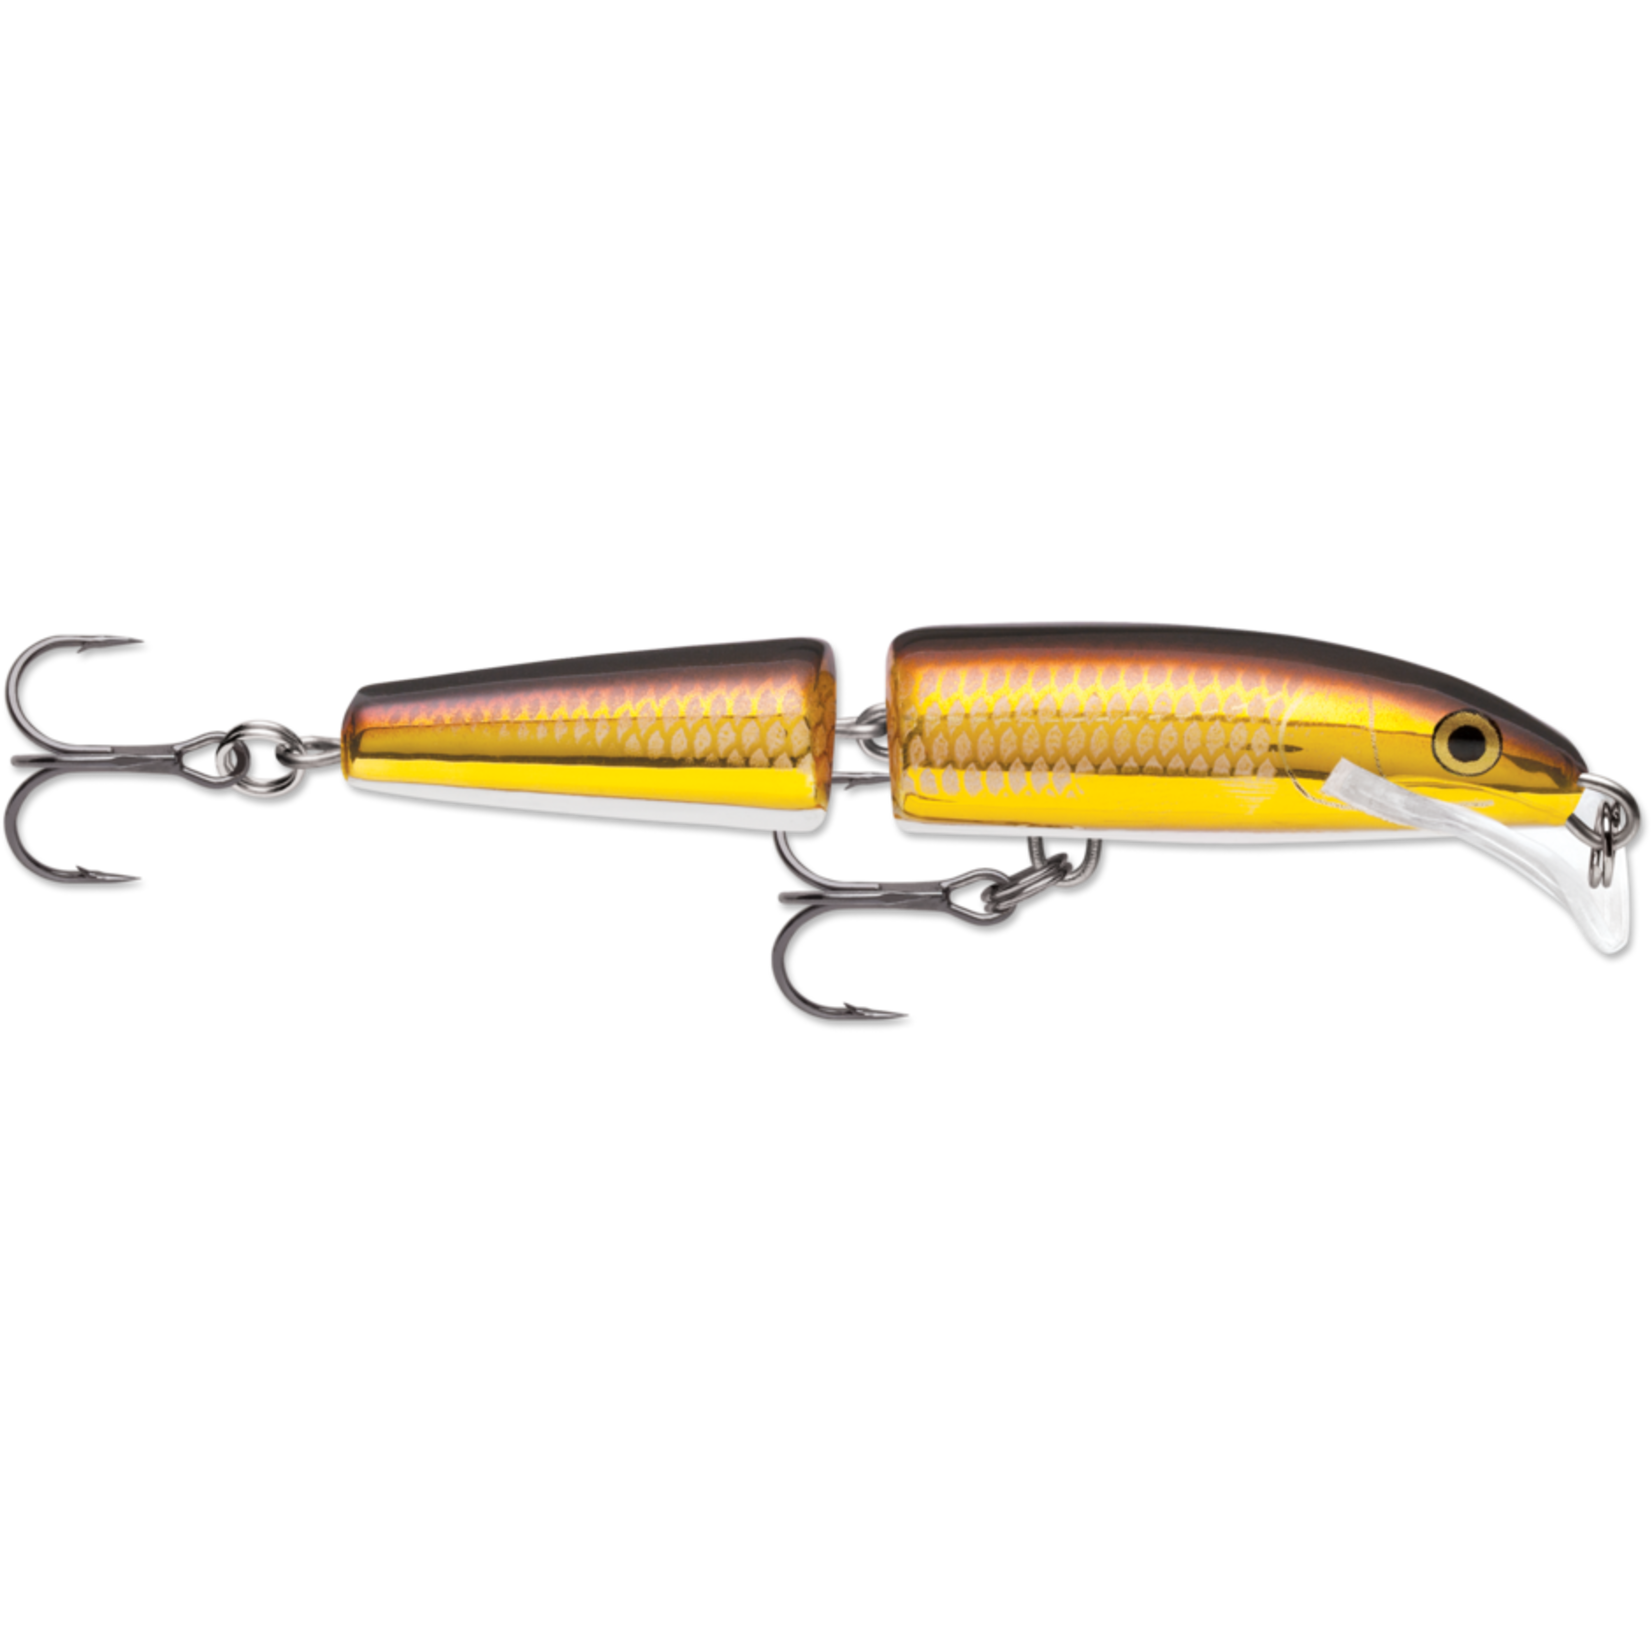 Rapala Scatter Rap Jointed Clown